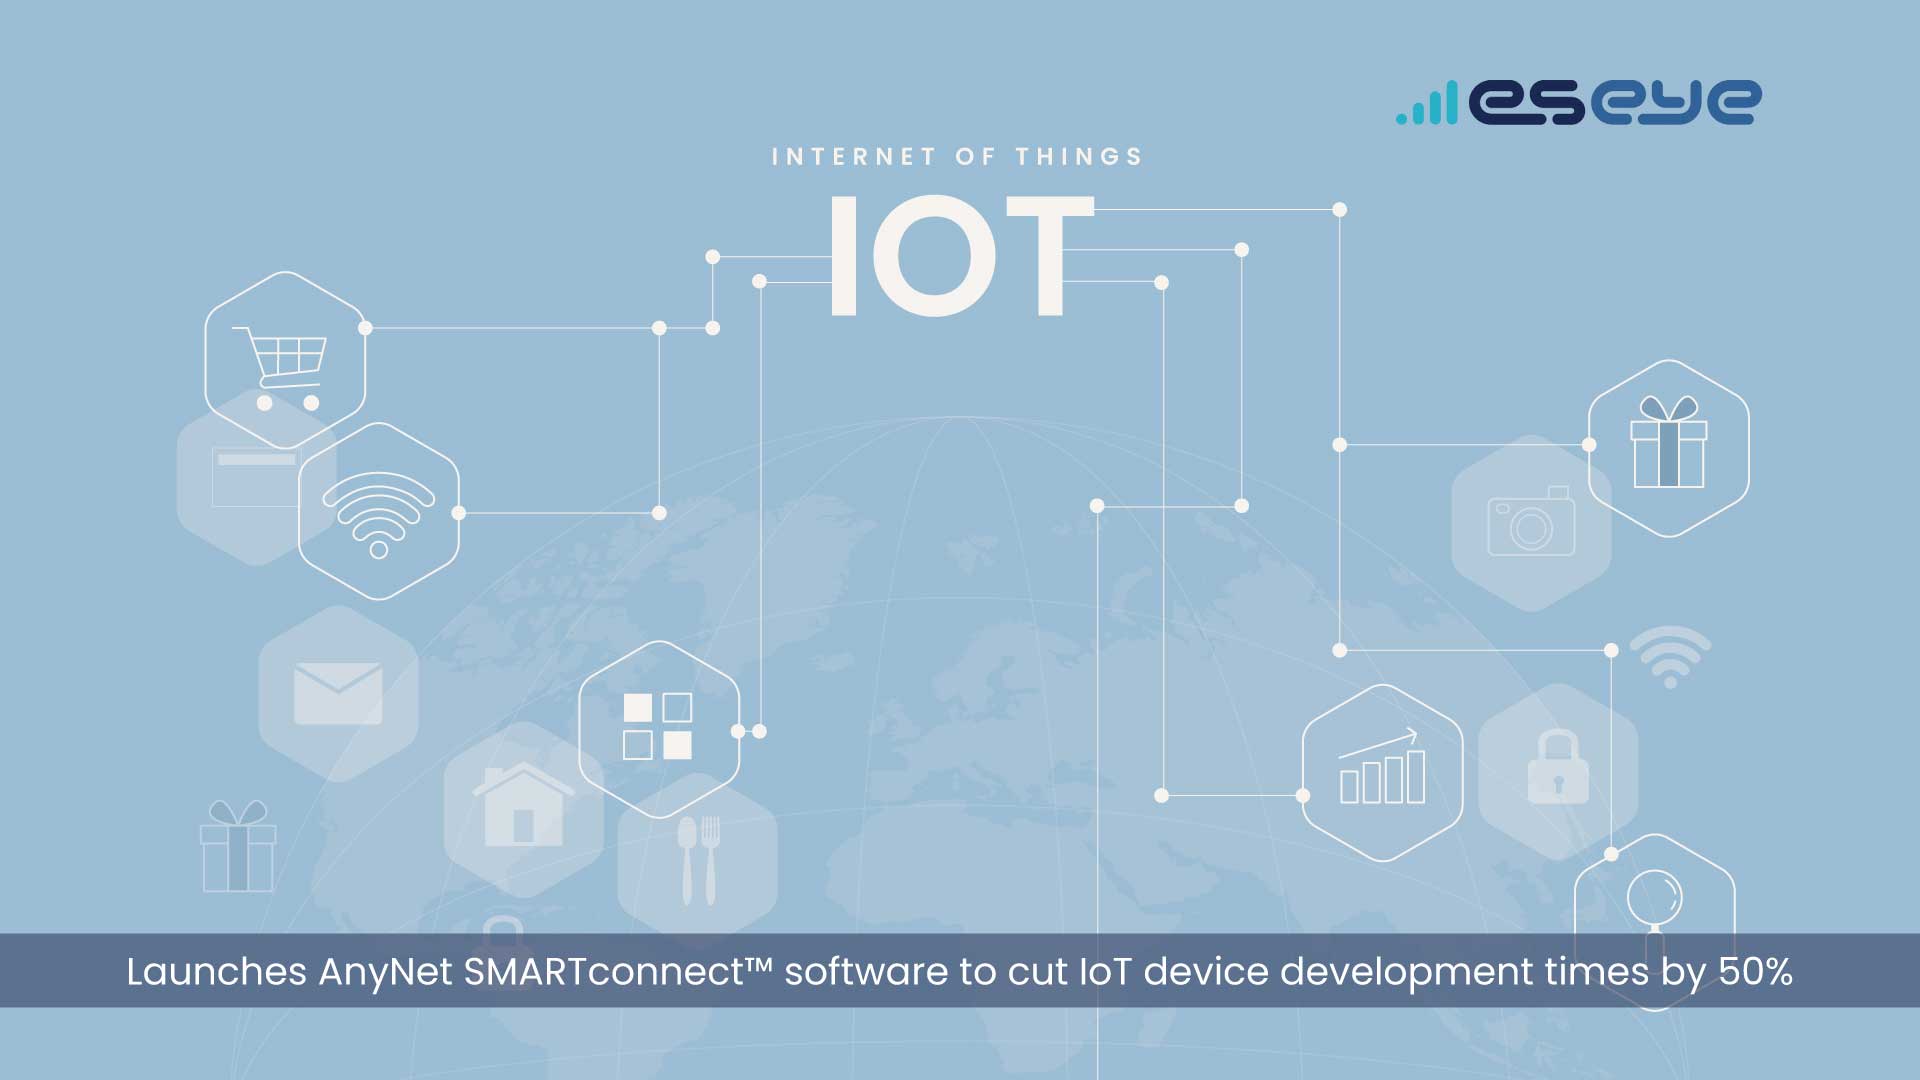 Eseye launches AnyNet SMARTconnect™ software to cut IoT device development times by 50%